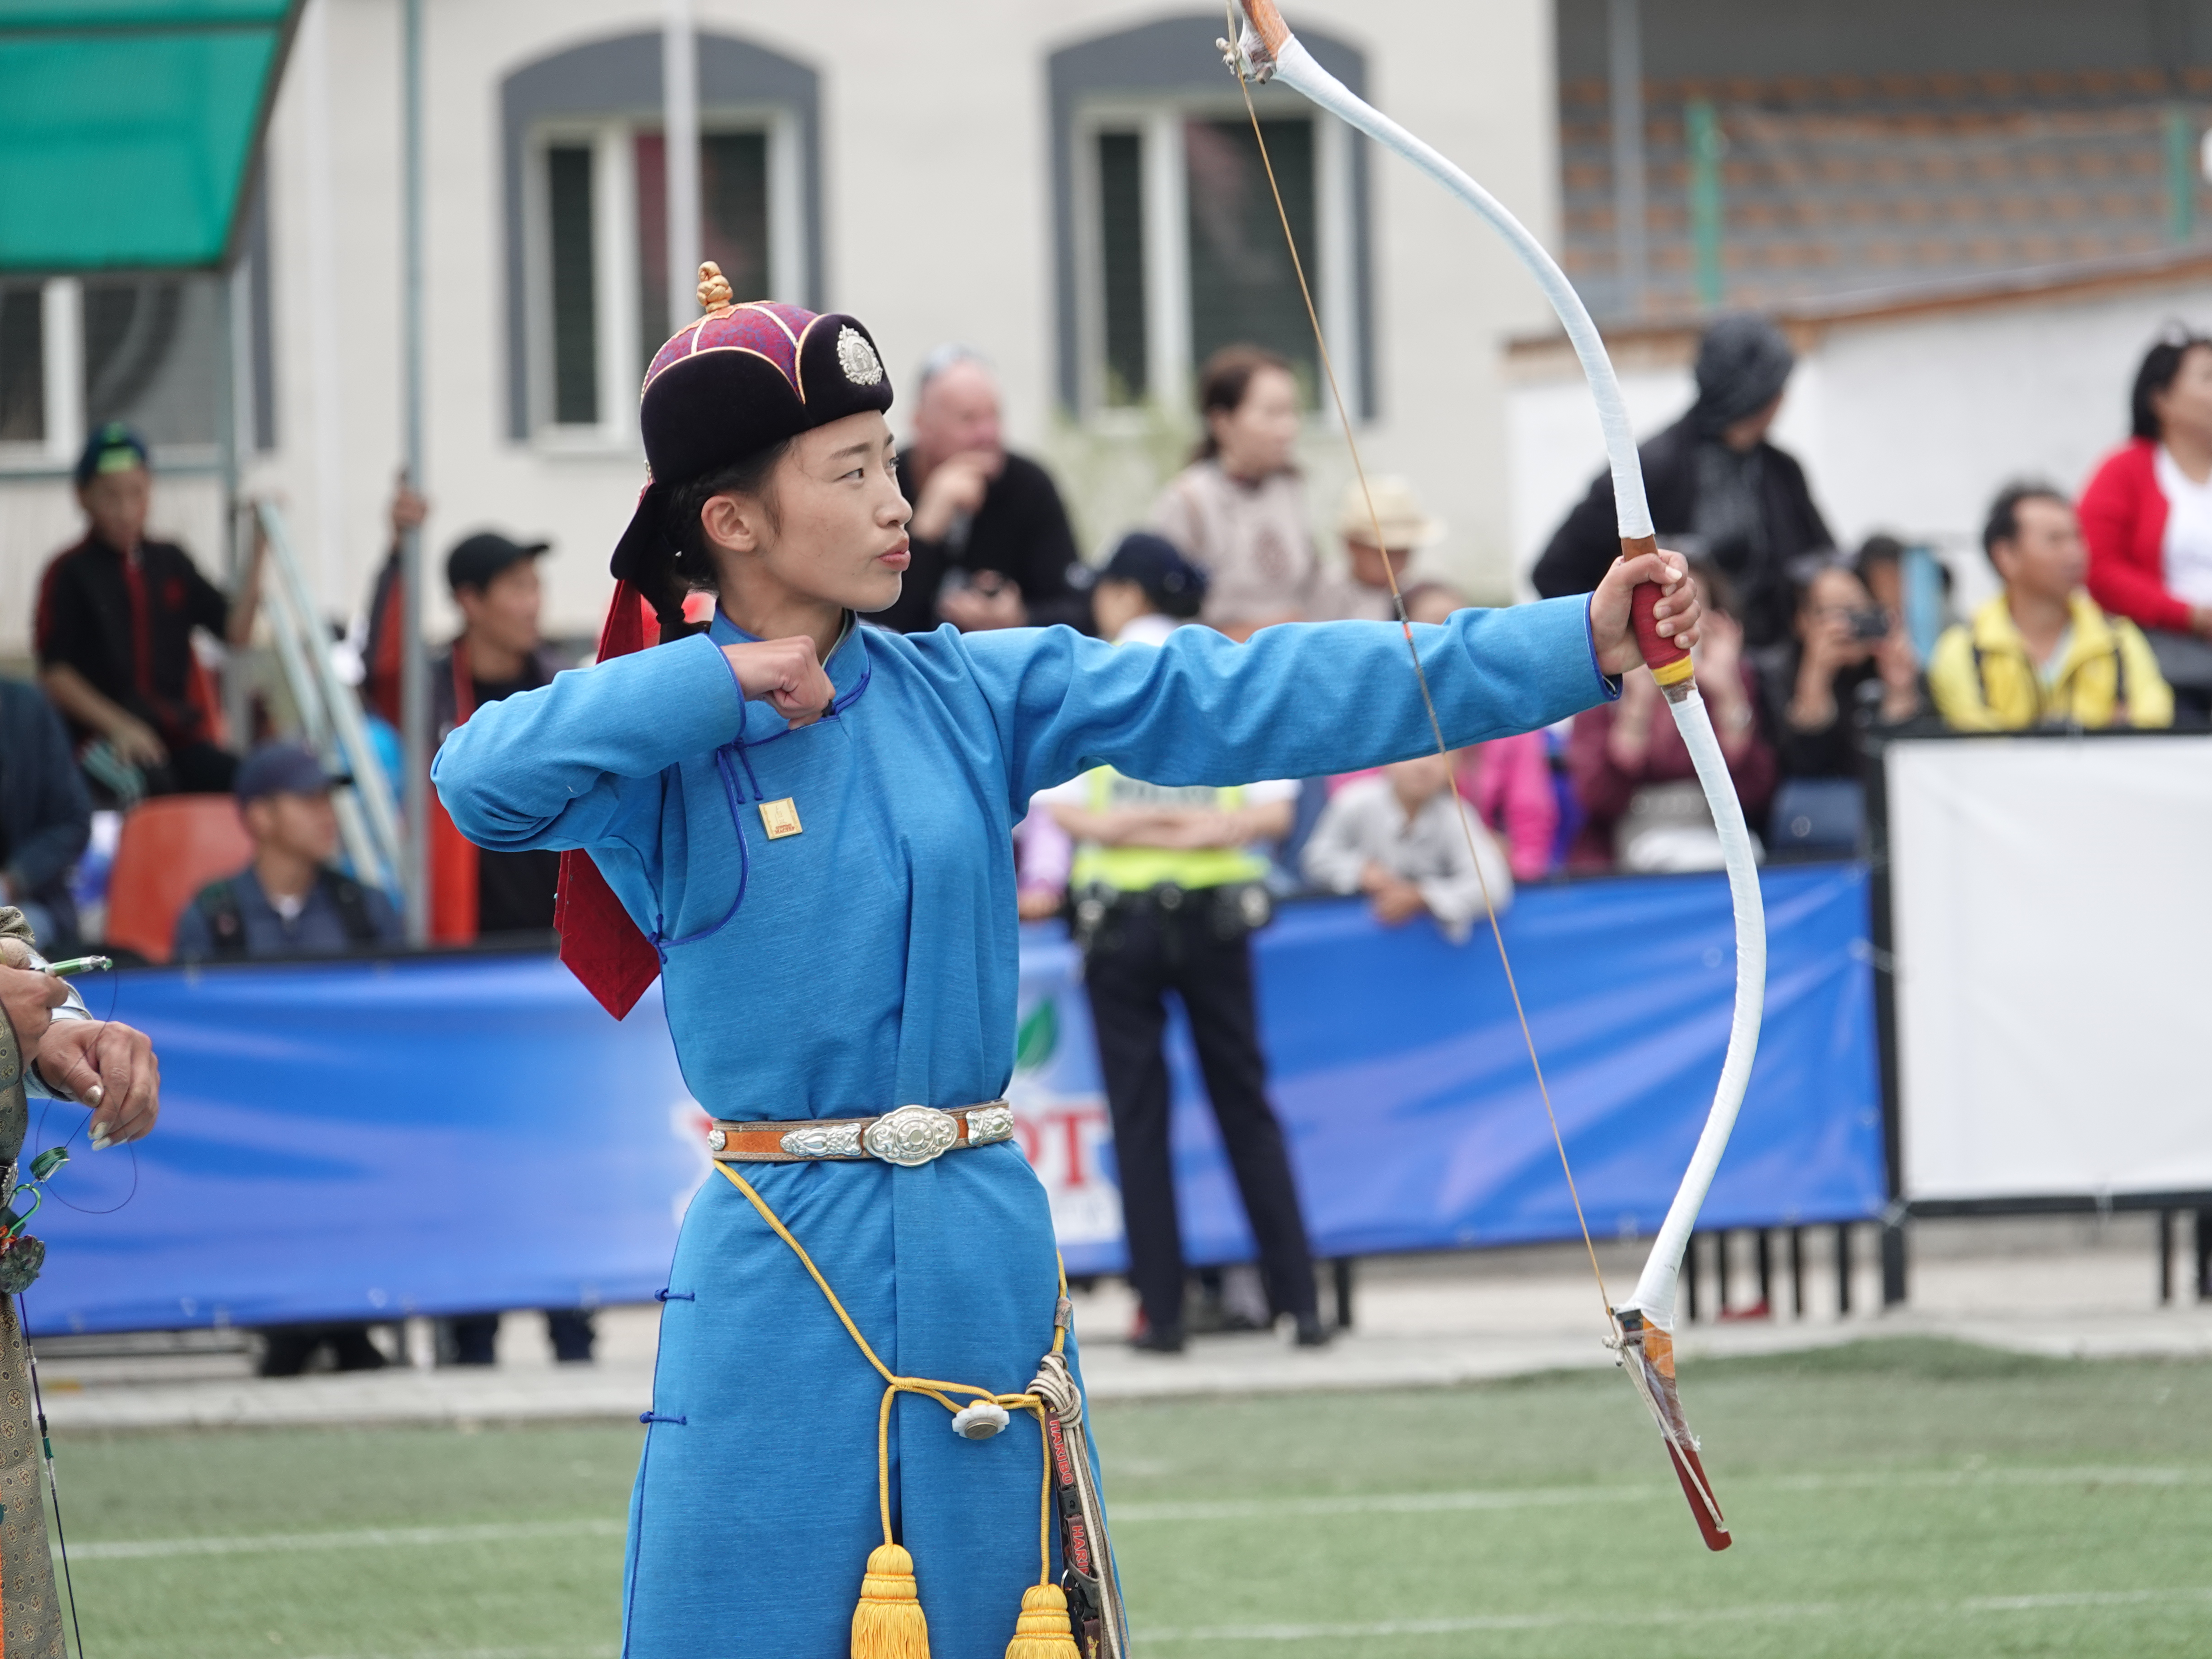 Festivals in Mongolia - Celebrations of Nomadic Traditions, Archery, Naadam Festival